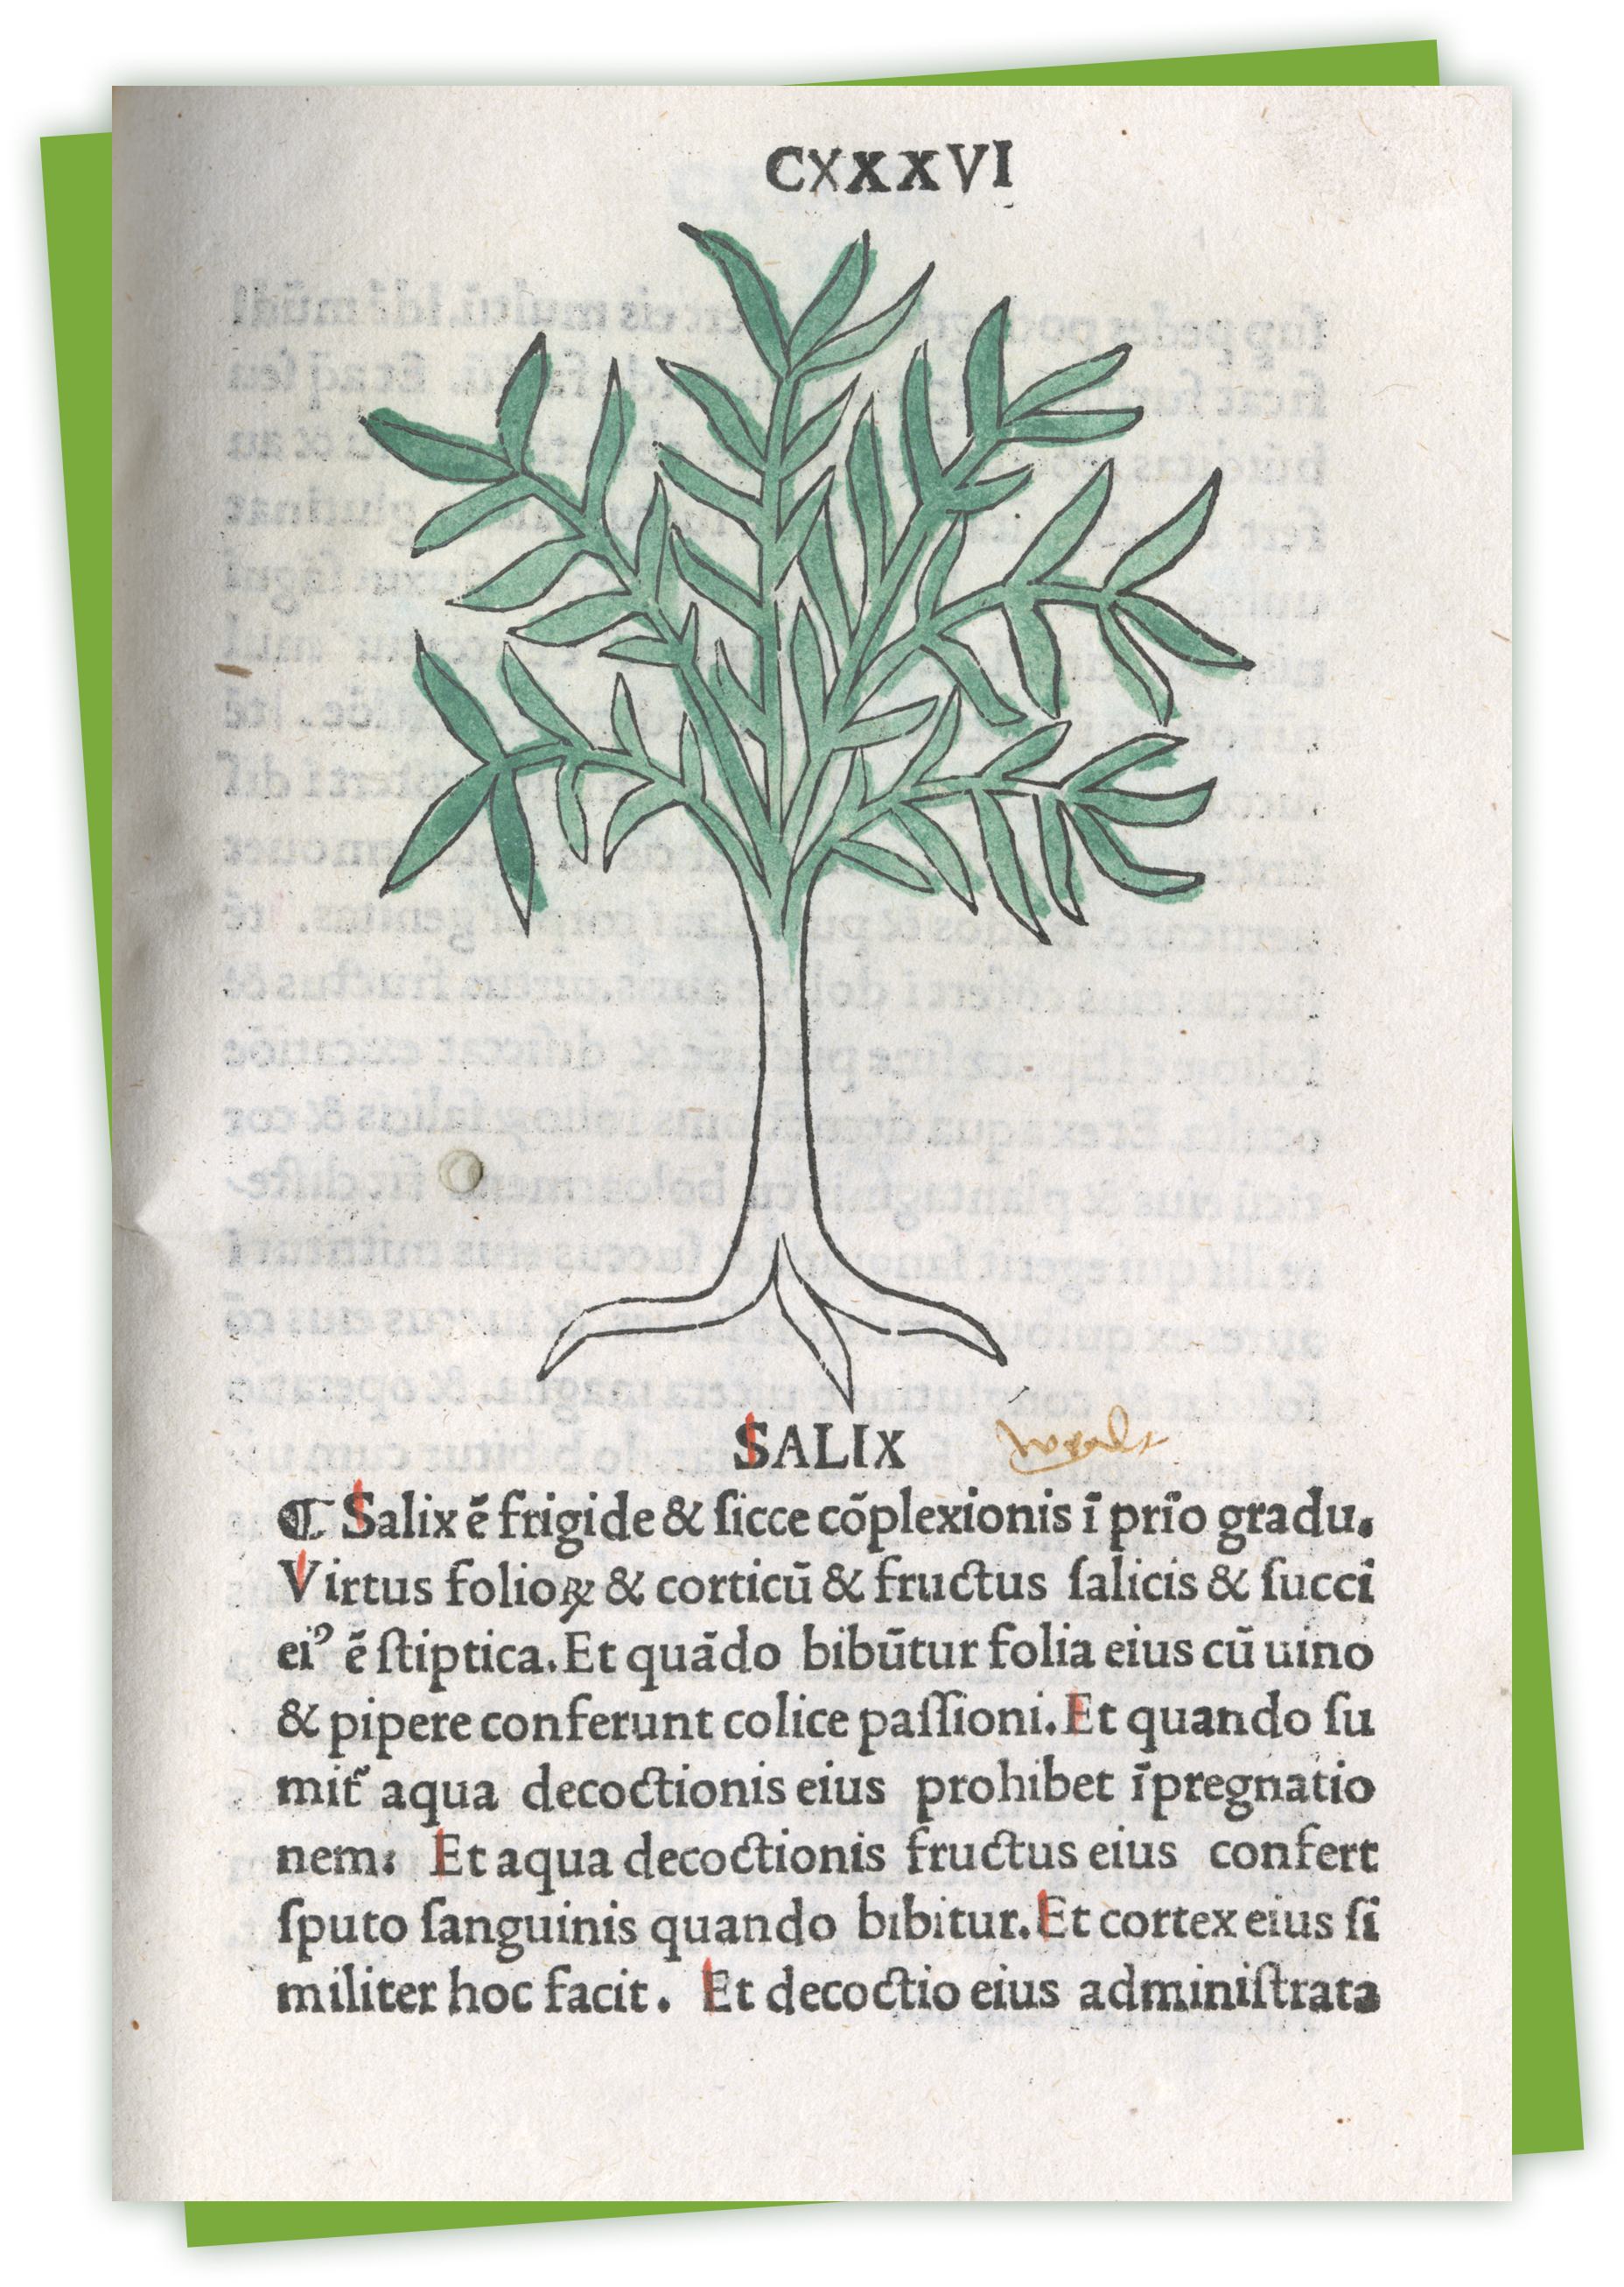 A book page showing a color illustration of a tree with text underneath